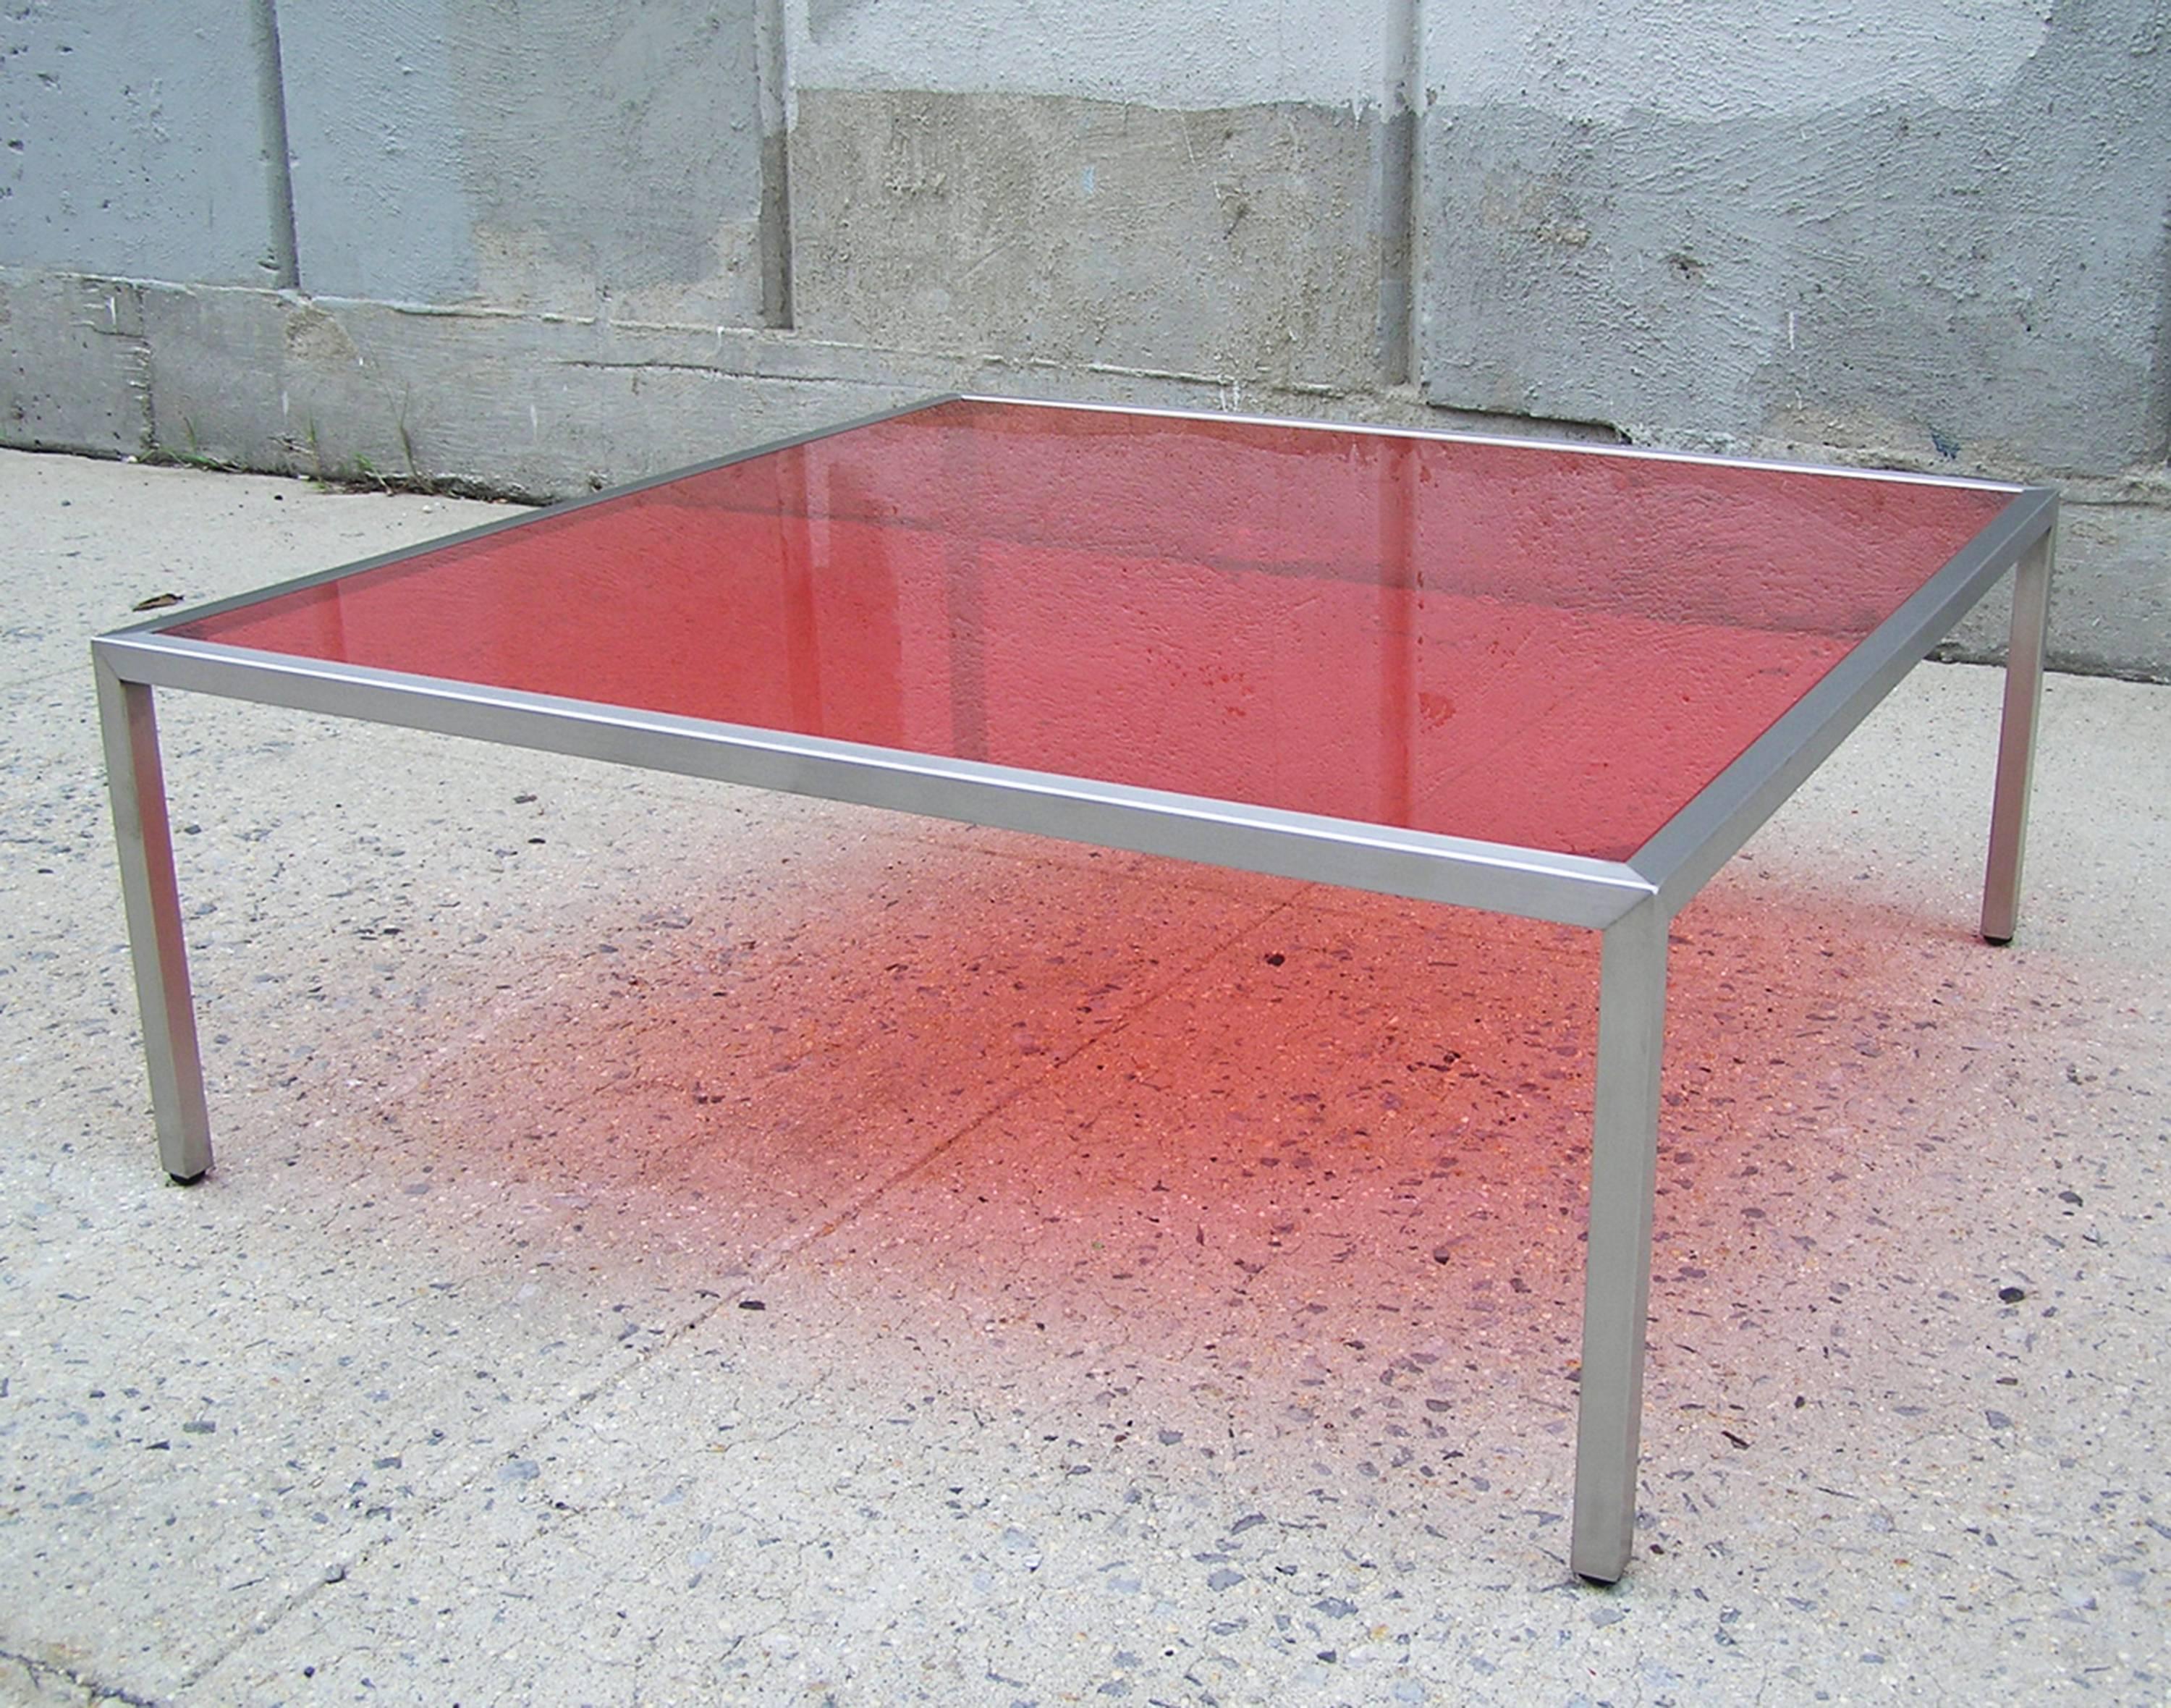 1" square tubular stainless steel frame with linear brushed supports an inset red laminated glass. Other colors or clear glass is available.